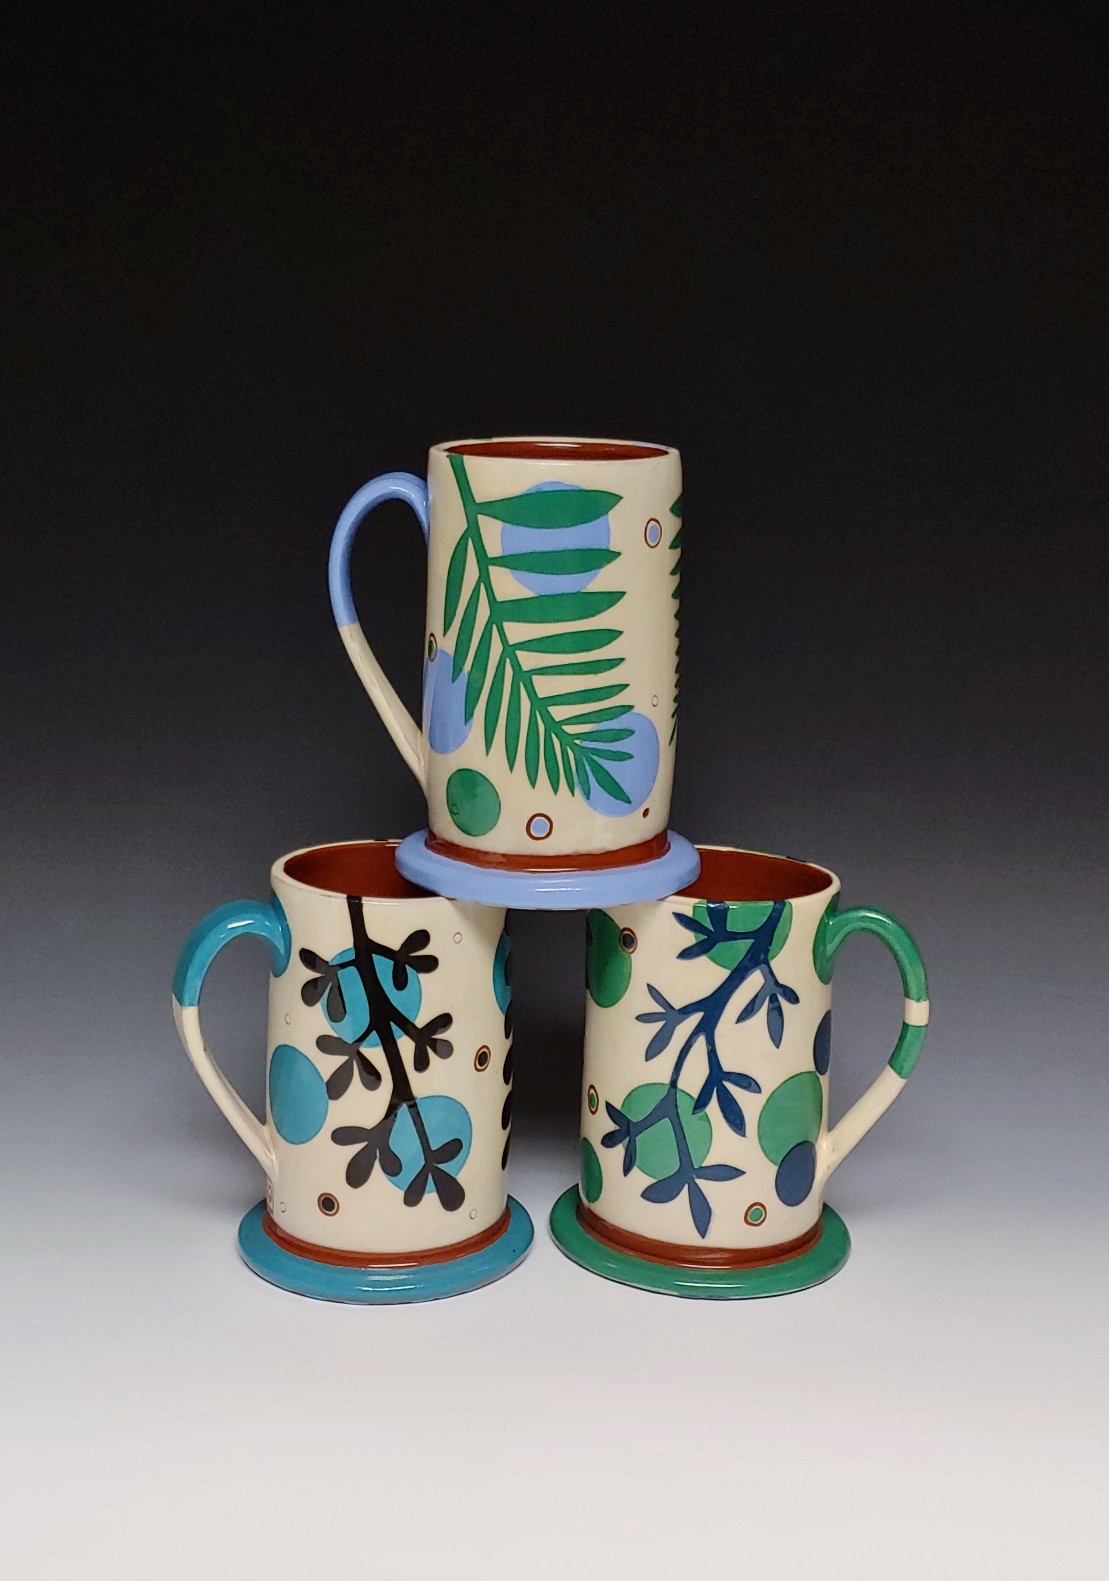 Three Turquoise Blue and Green Leafy Mugs